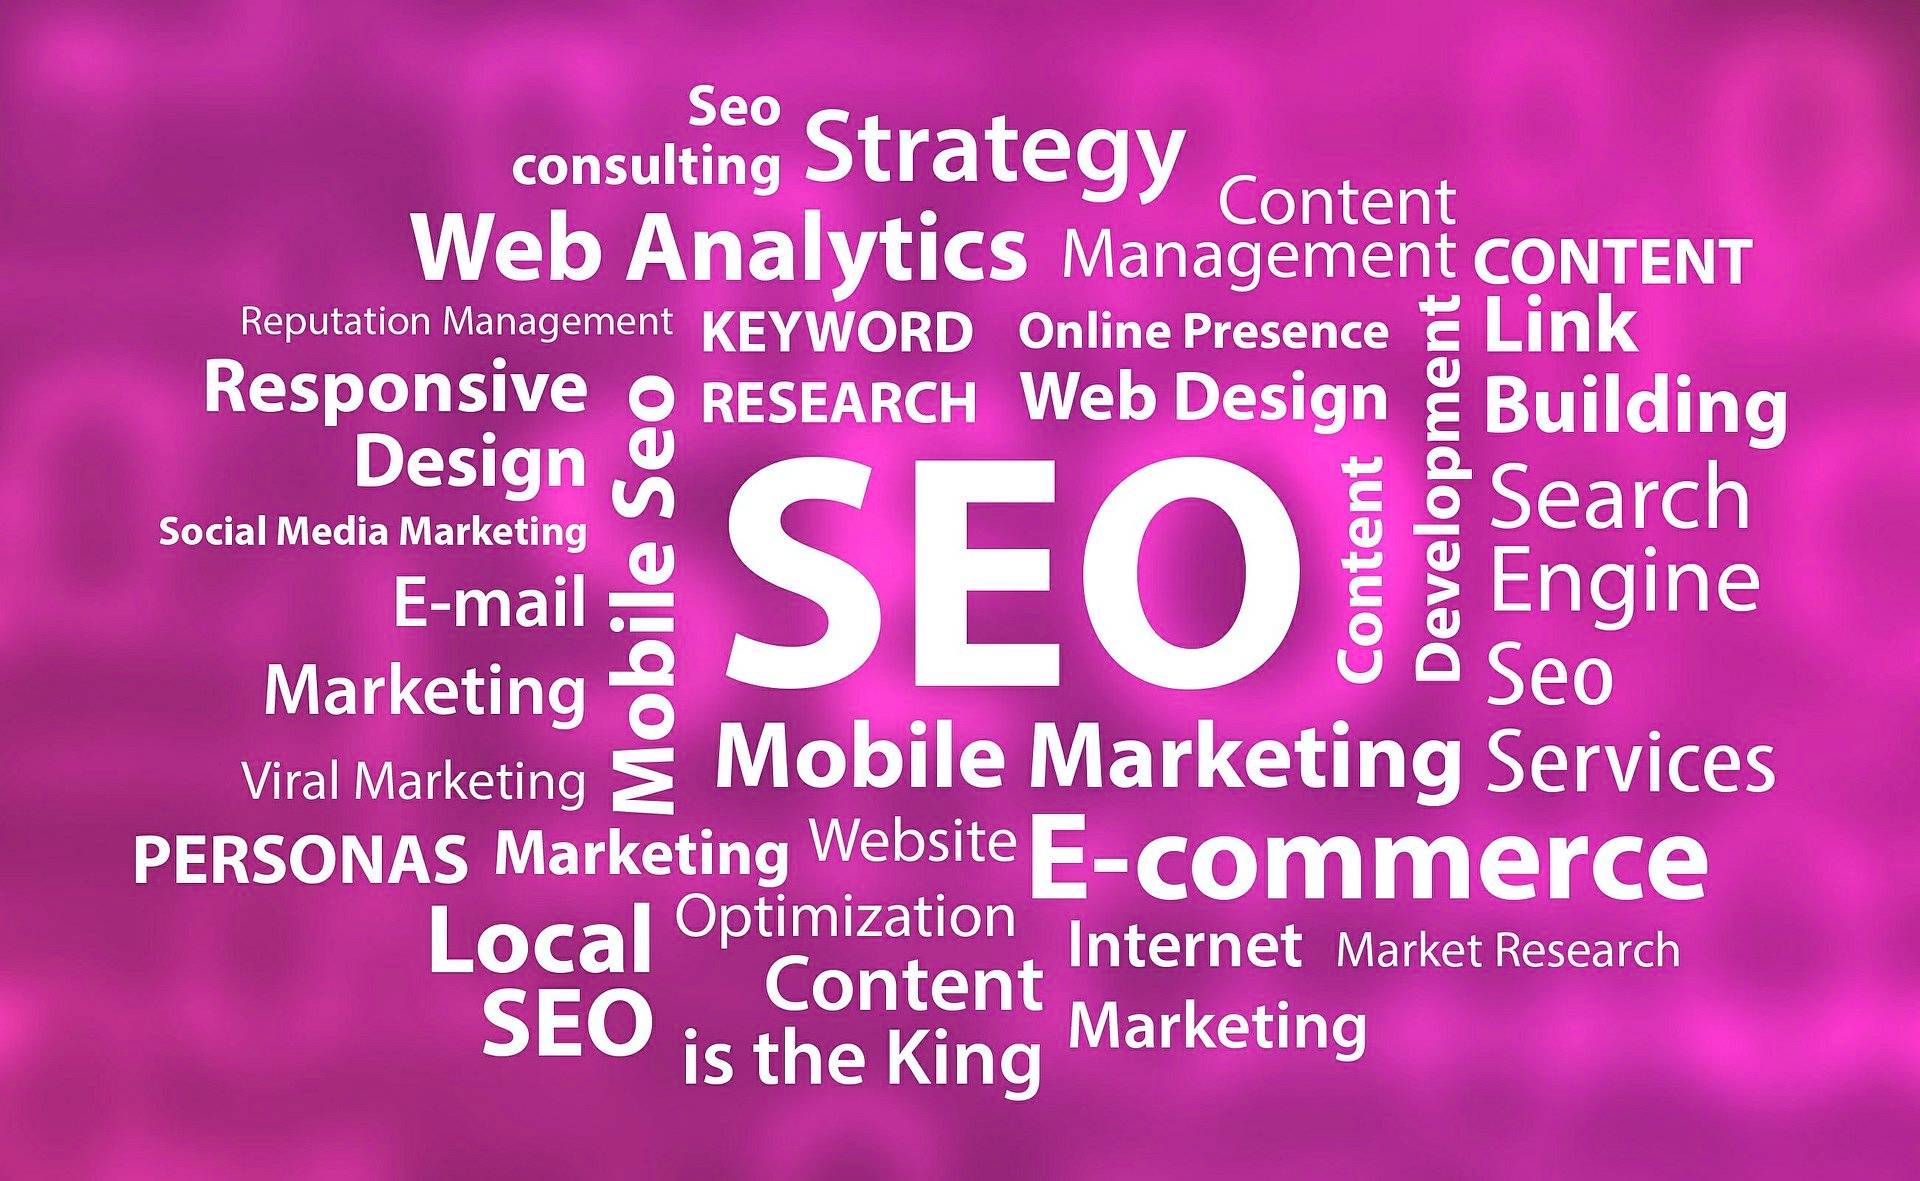 Best SEO Tips for Lawyers Who Want Their Website Rankings to Improve in the SERPs